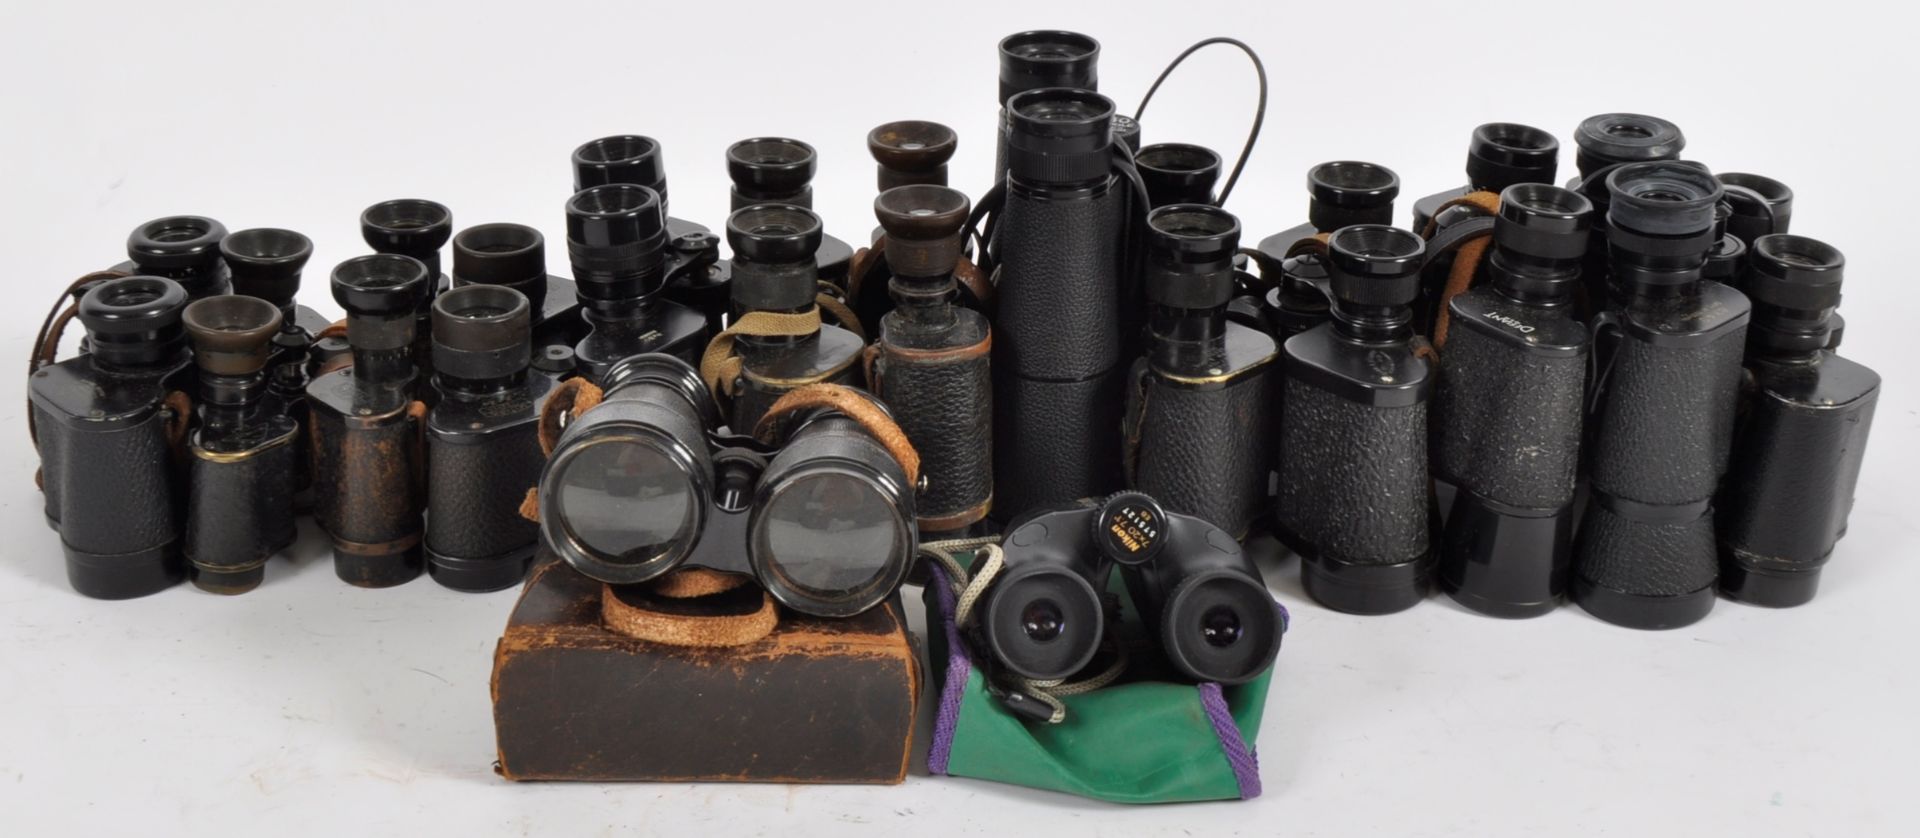 MIXED COLLECTION OF VINTAGE BINOCULARS INCLUDING MILITARY ISSUE - Image 2 of 6